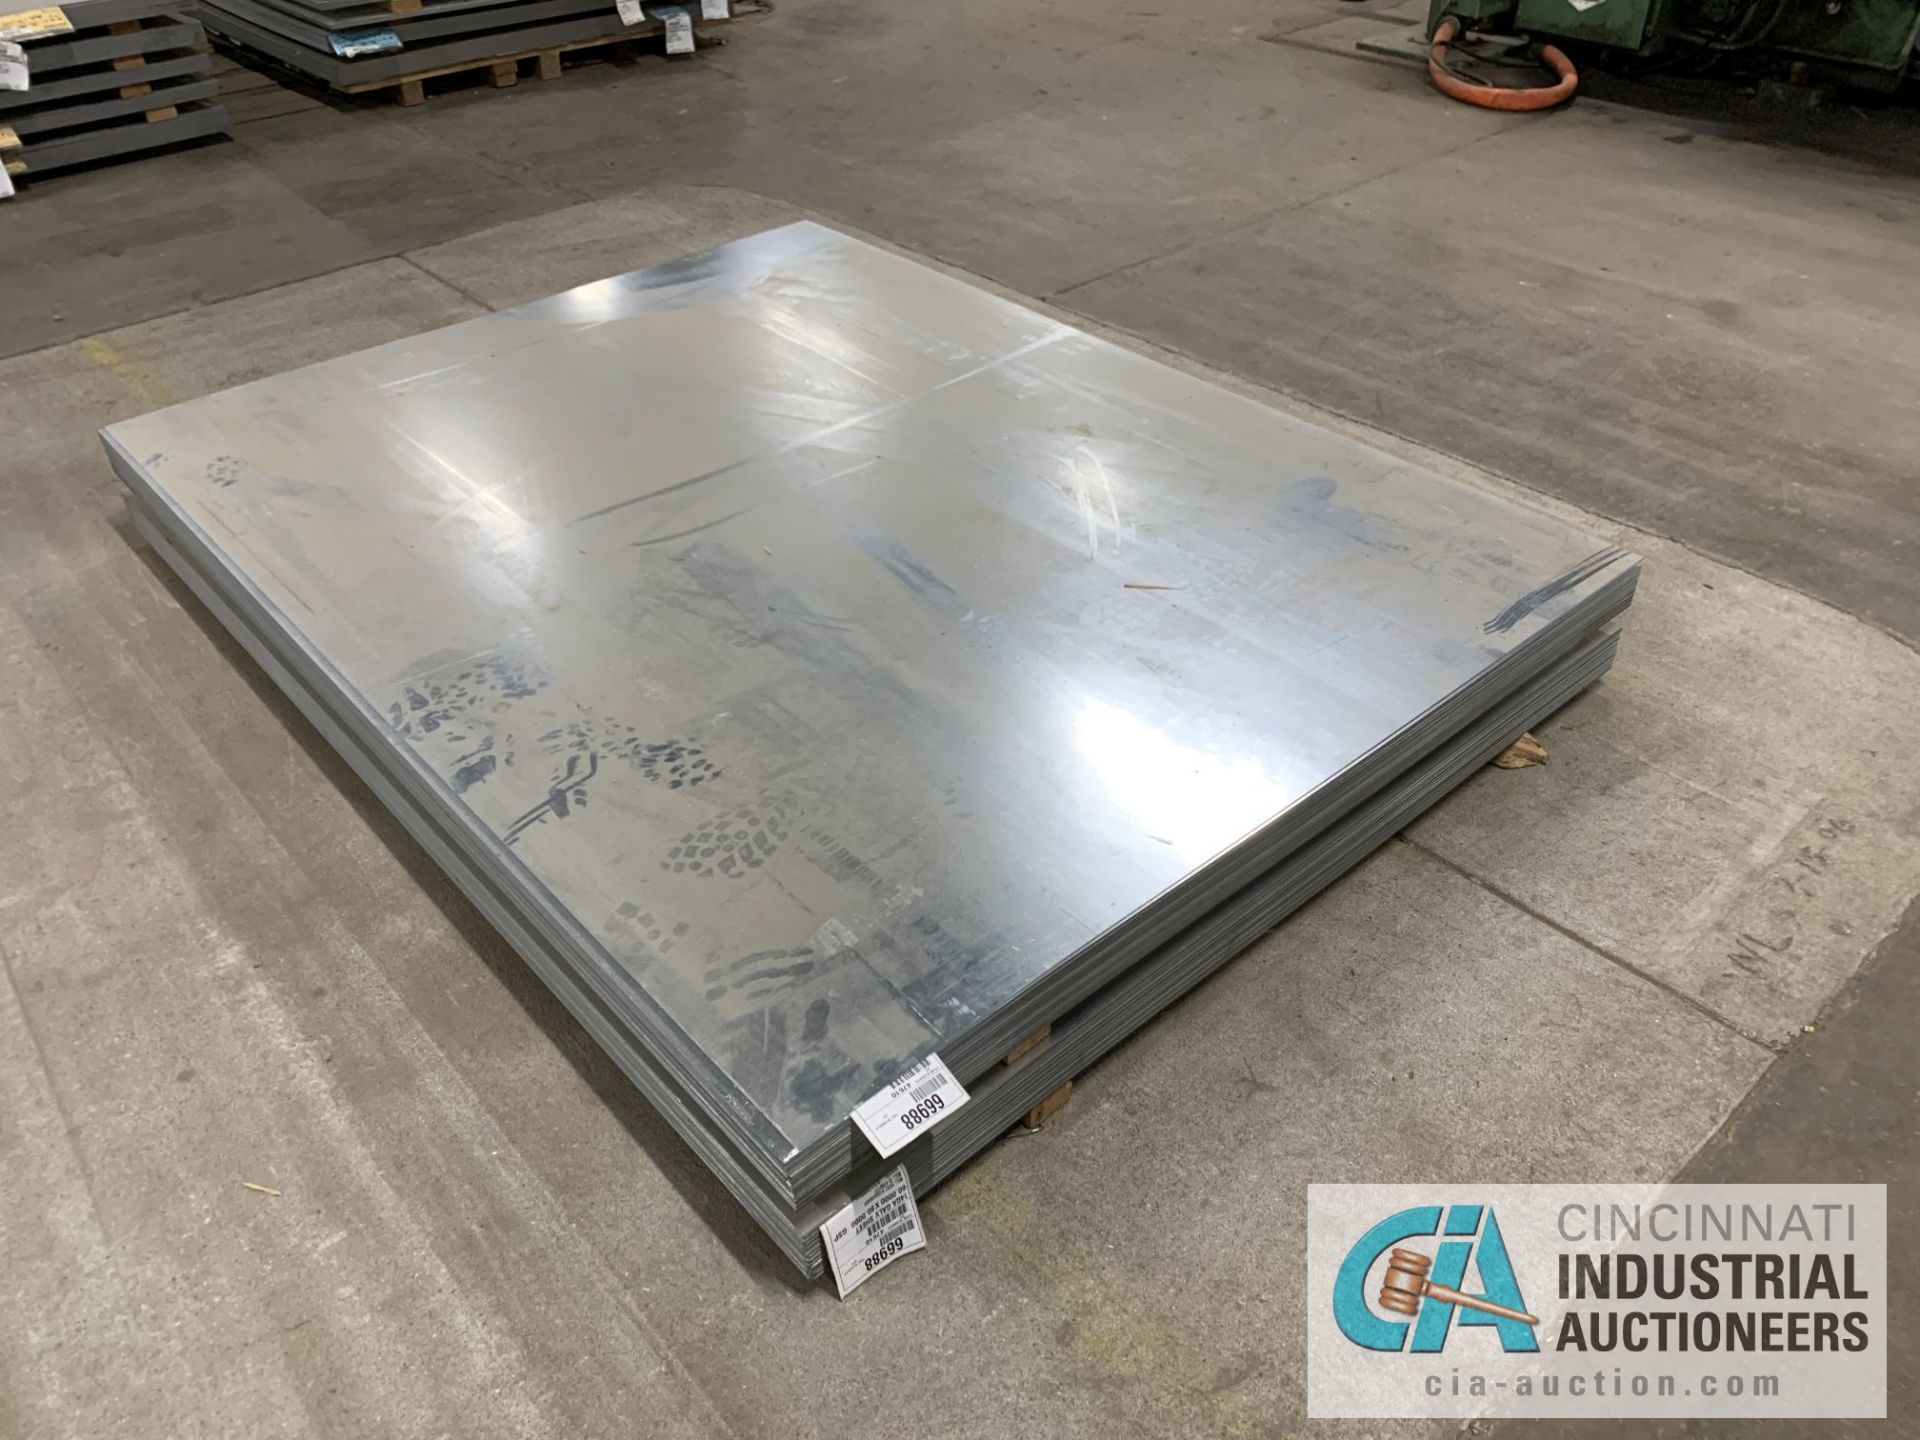 (LOT) APPROX. 9,187 LBS. COATED SHEET STEEL, 1-STACK, 1-BUNDLE, SEE INVENTORY FOR LISTING.